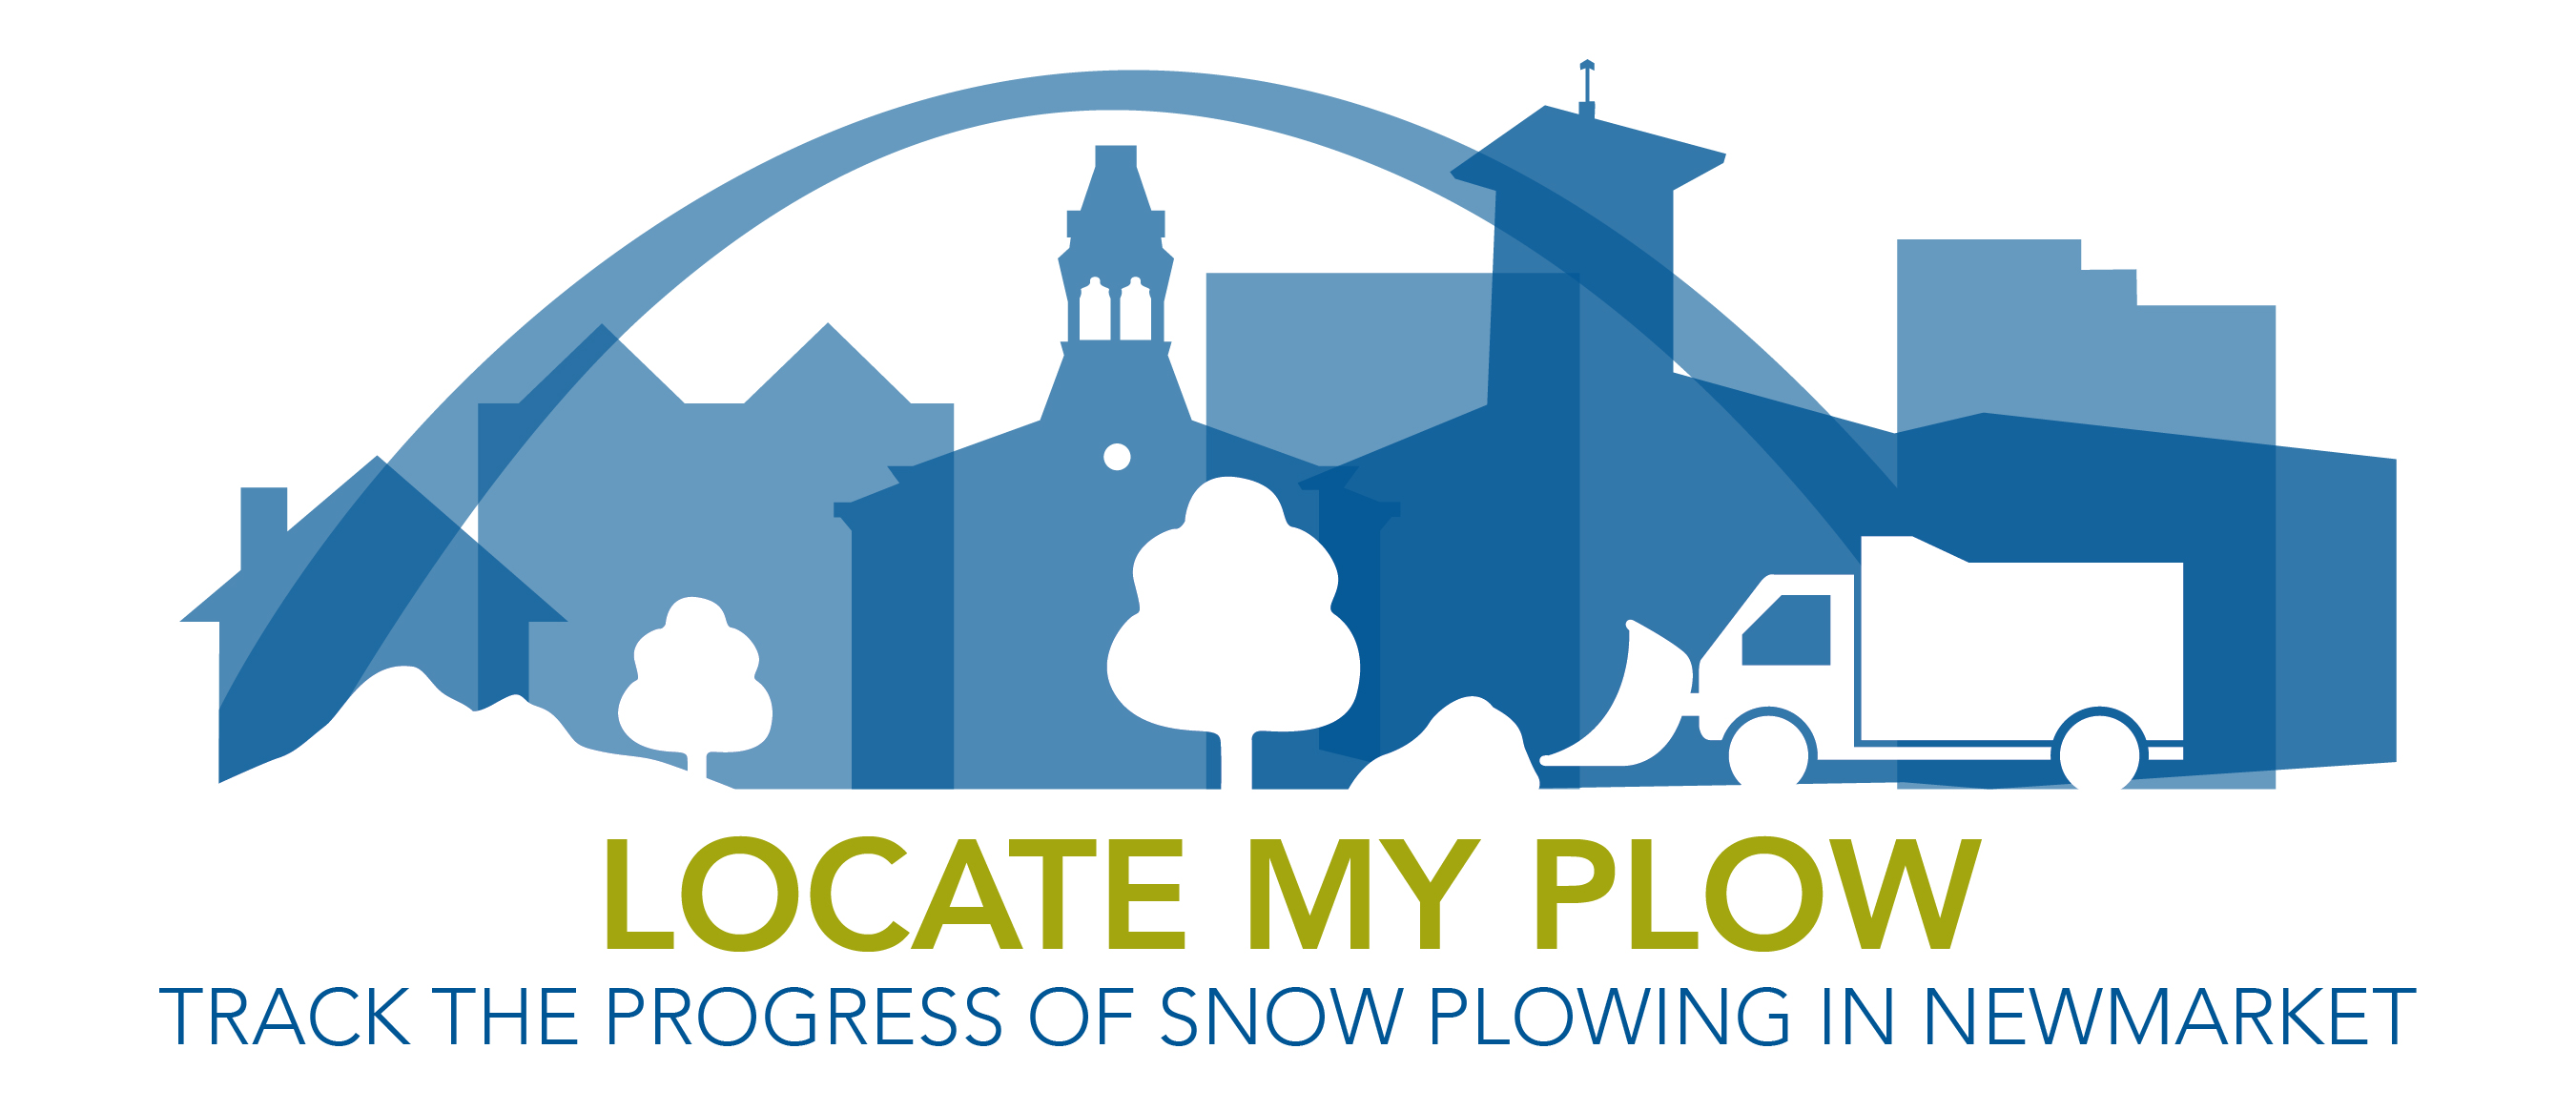 Locate my Plow: Track the Progress of Snow plowing in Newmarket